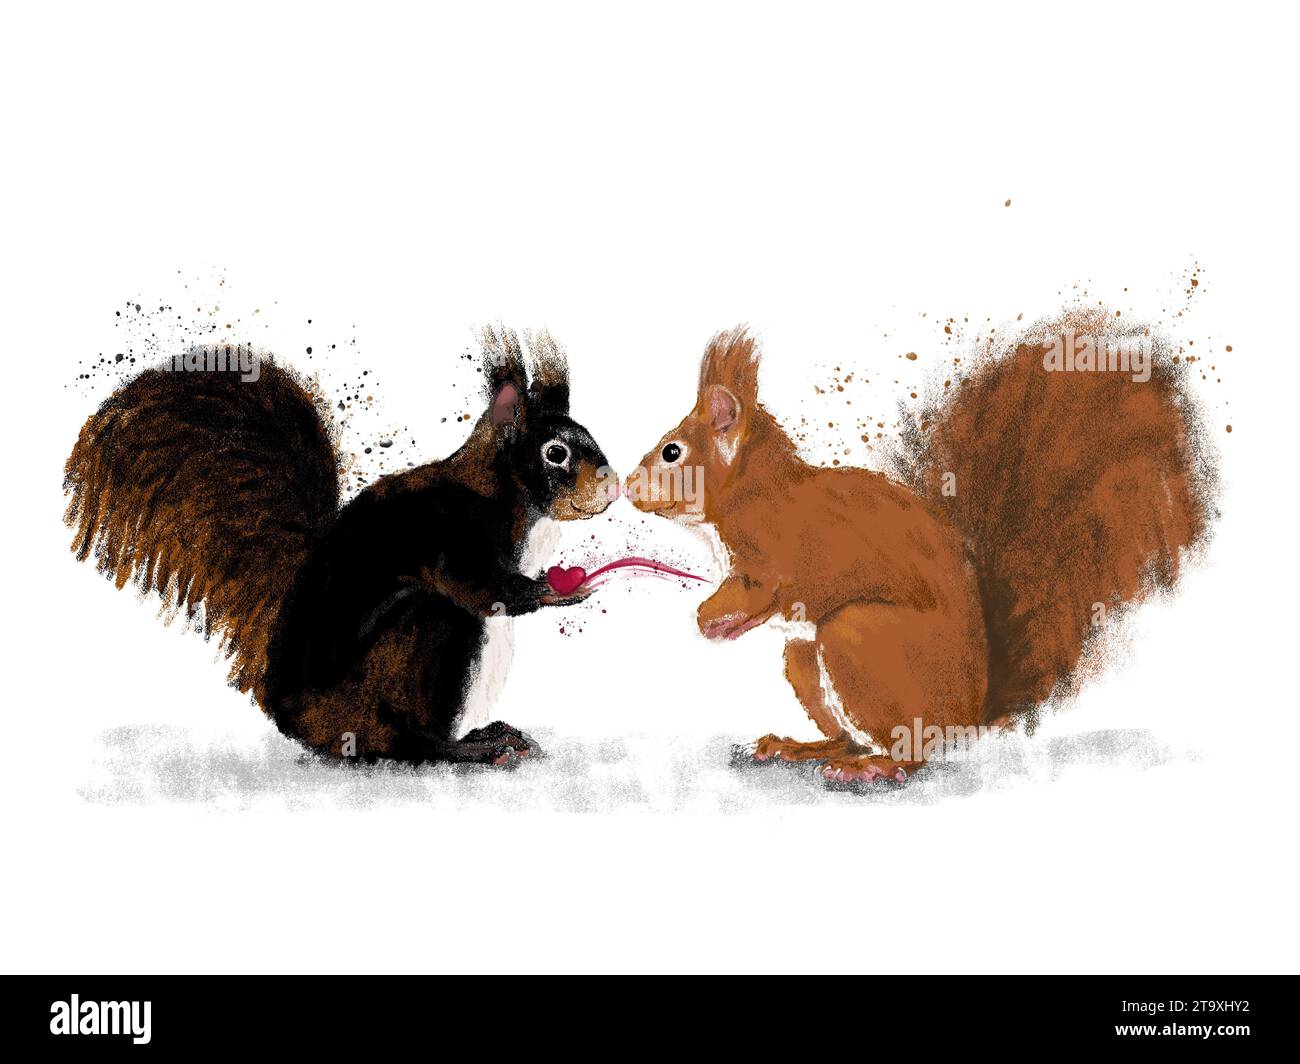 Two squirrels sharing their heart illustration Stock Photo